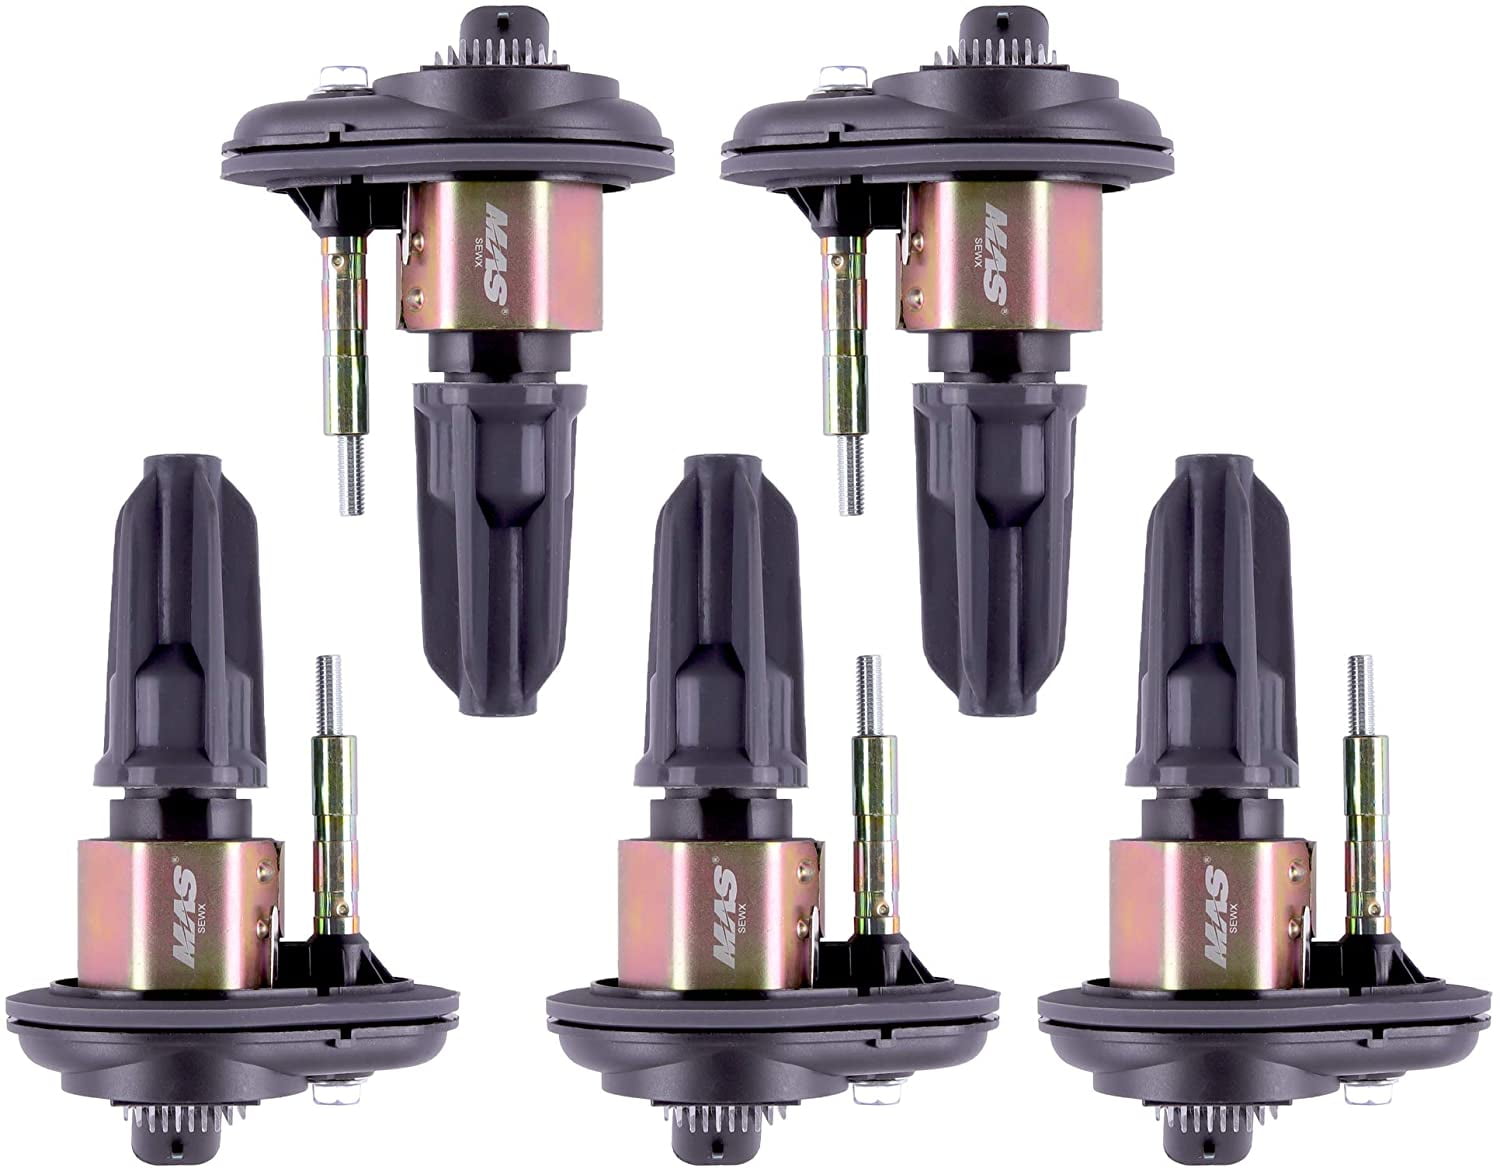 UF303 Ignition Coils 6 Pack For Chevy GMC ISUZU BUICK OLDSMOBILE SAAB HUMMER New 